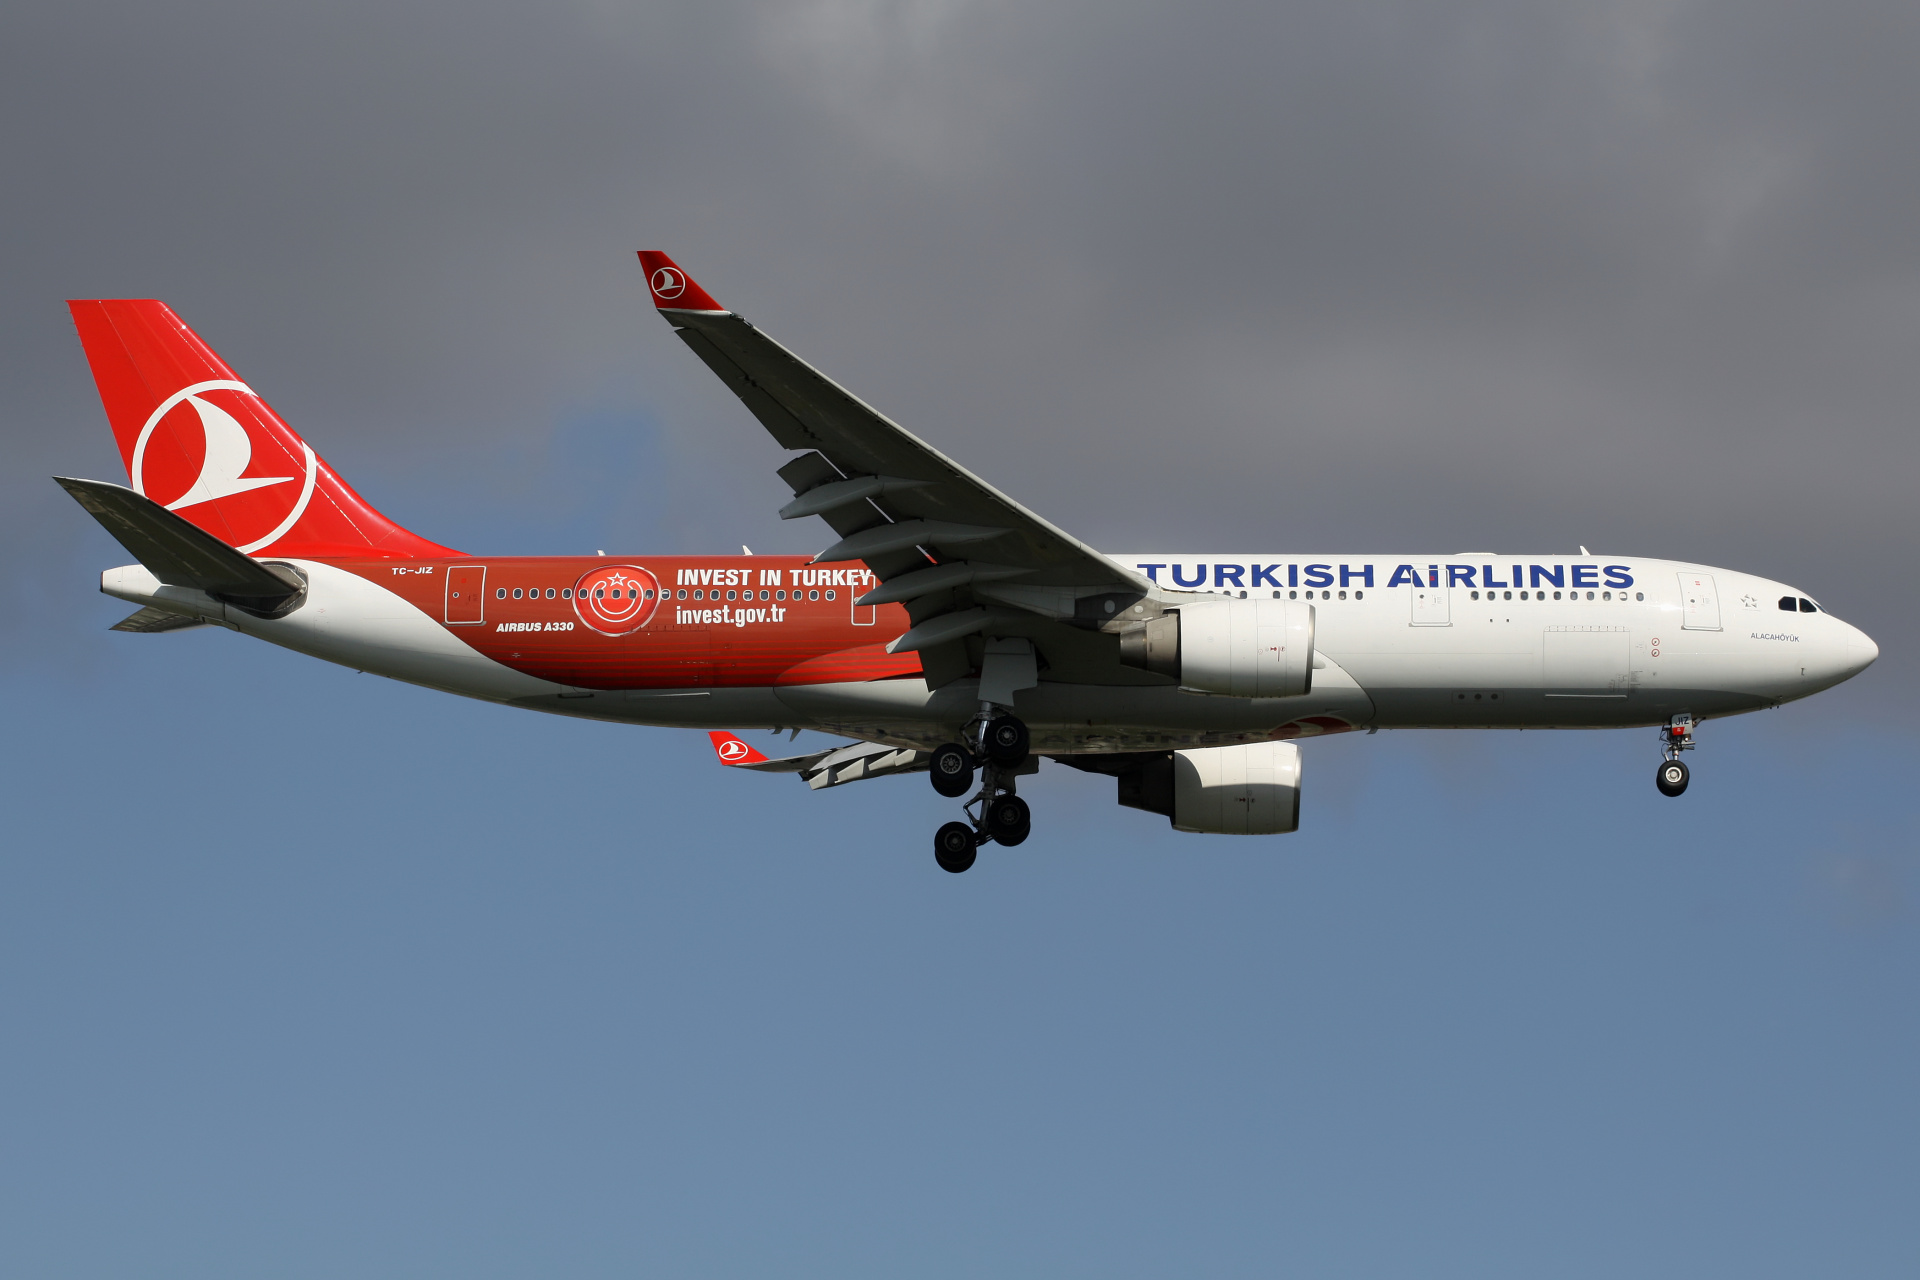 TC-JIZ (Invest in Turkey livery) (Aircraft » Istanbul Atatürk Airport » Airbus A330-200 » THY Turkish Airlines)